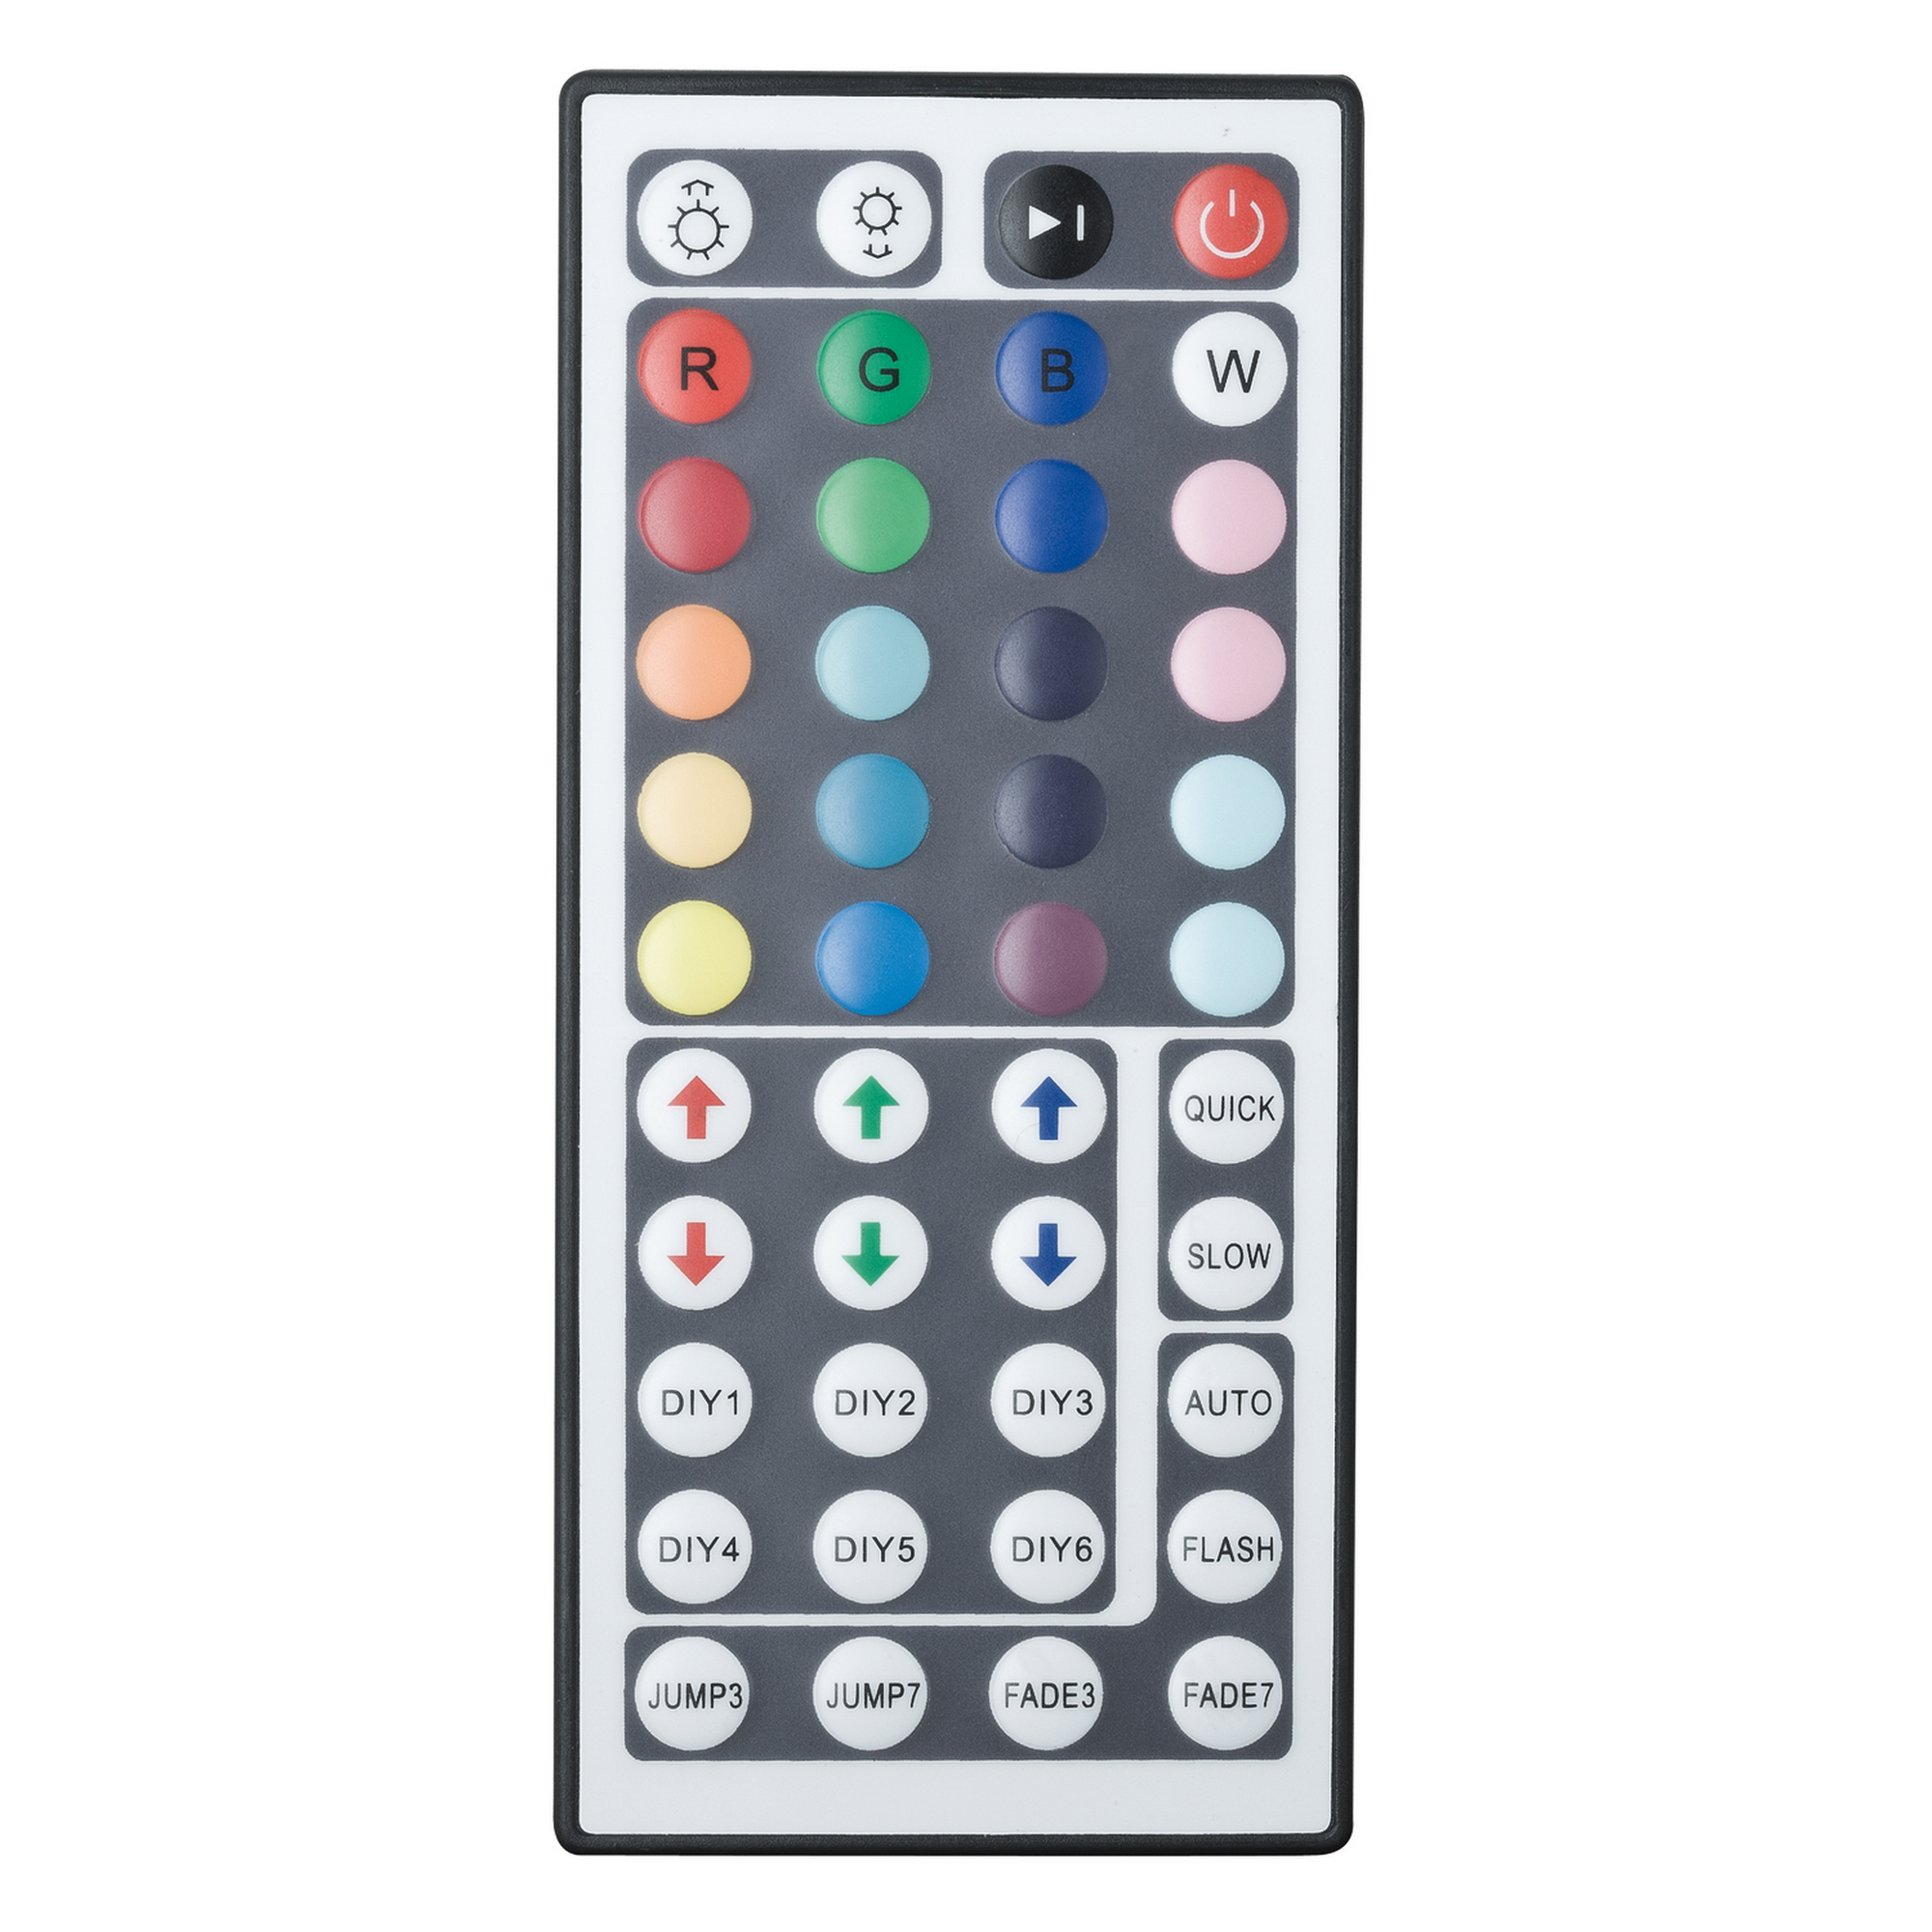 LED-Controller RGB "YourLED" mit Infrarot-Fernbedienung + product picture